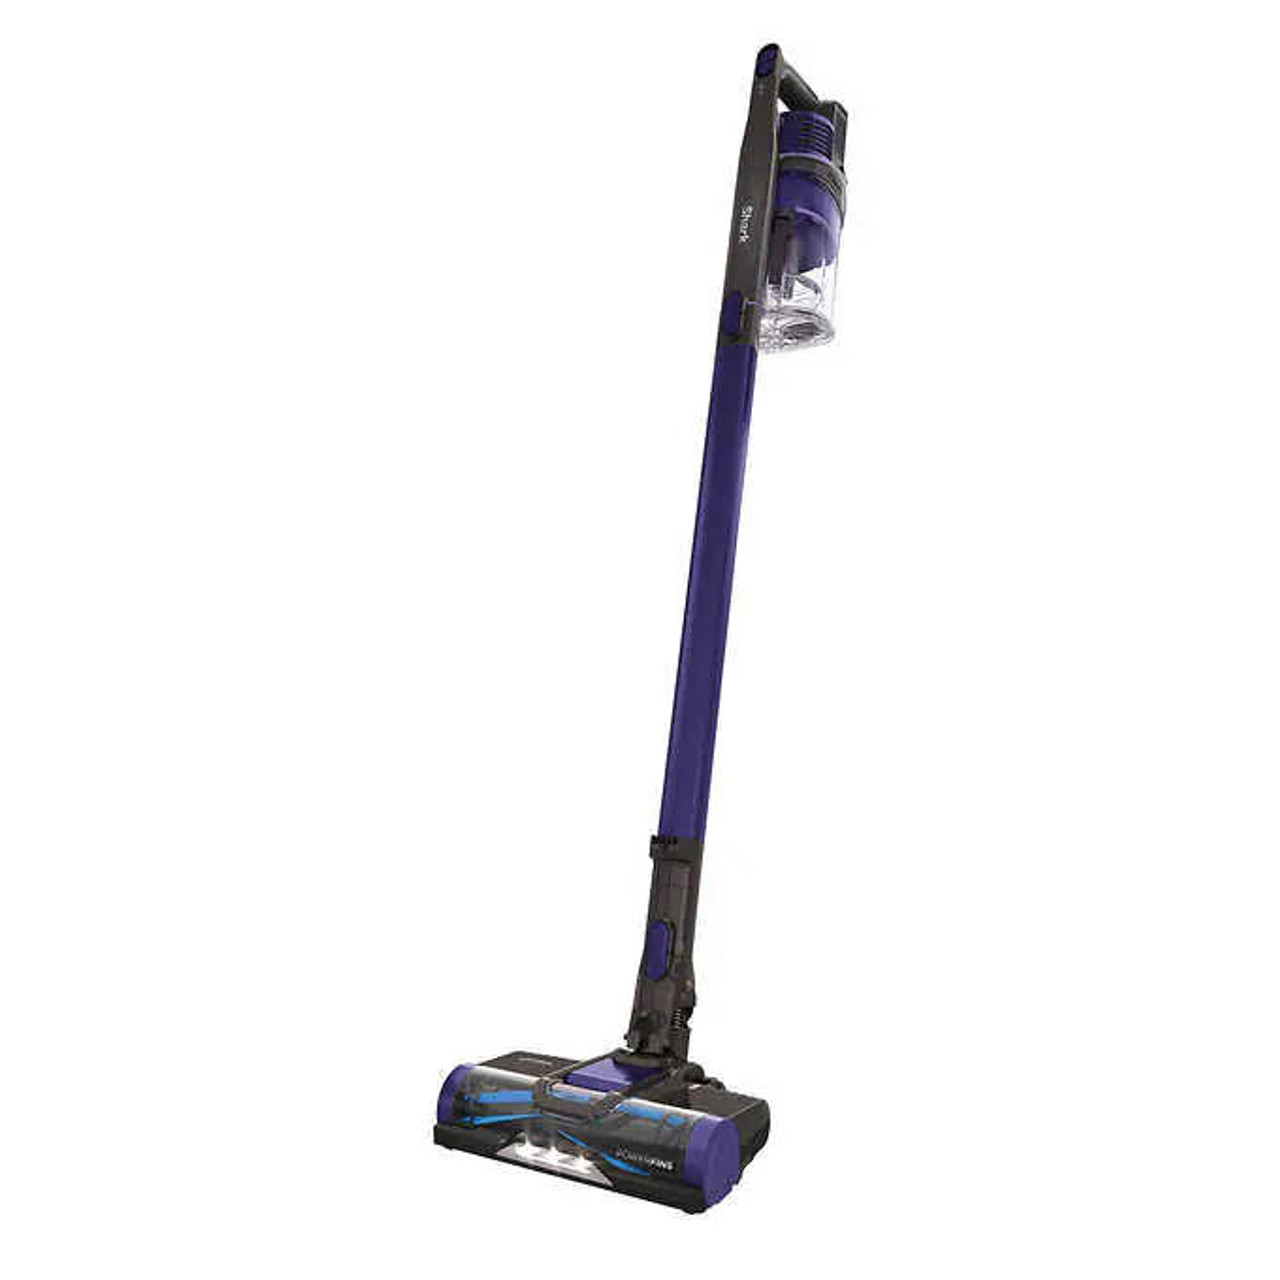 Shark Rocket Pet Plus Cordless Stick Vacuum - Powerful Suction, Self-Cleaning Brushroll, and Extended Runtime
-Chicken Pieces